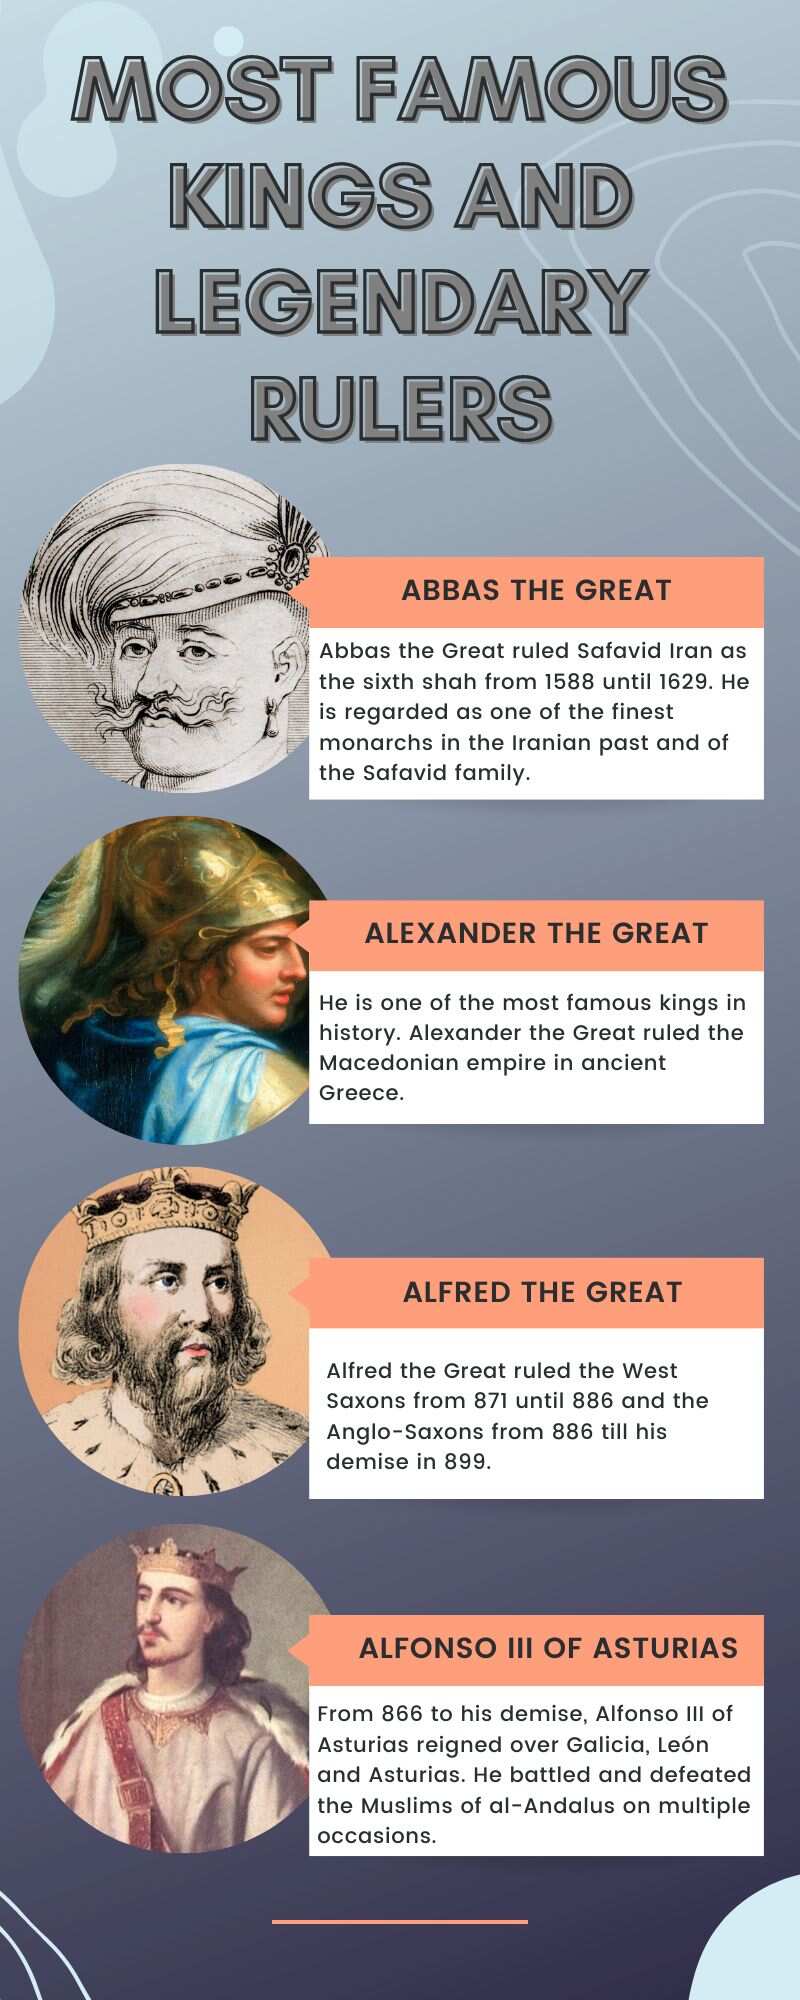 Most famous kings and legendary rulers